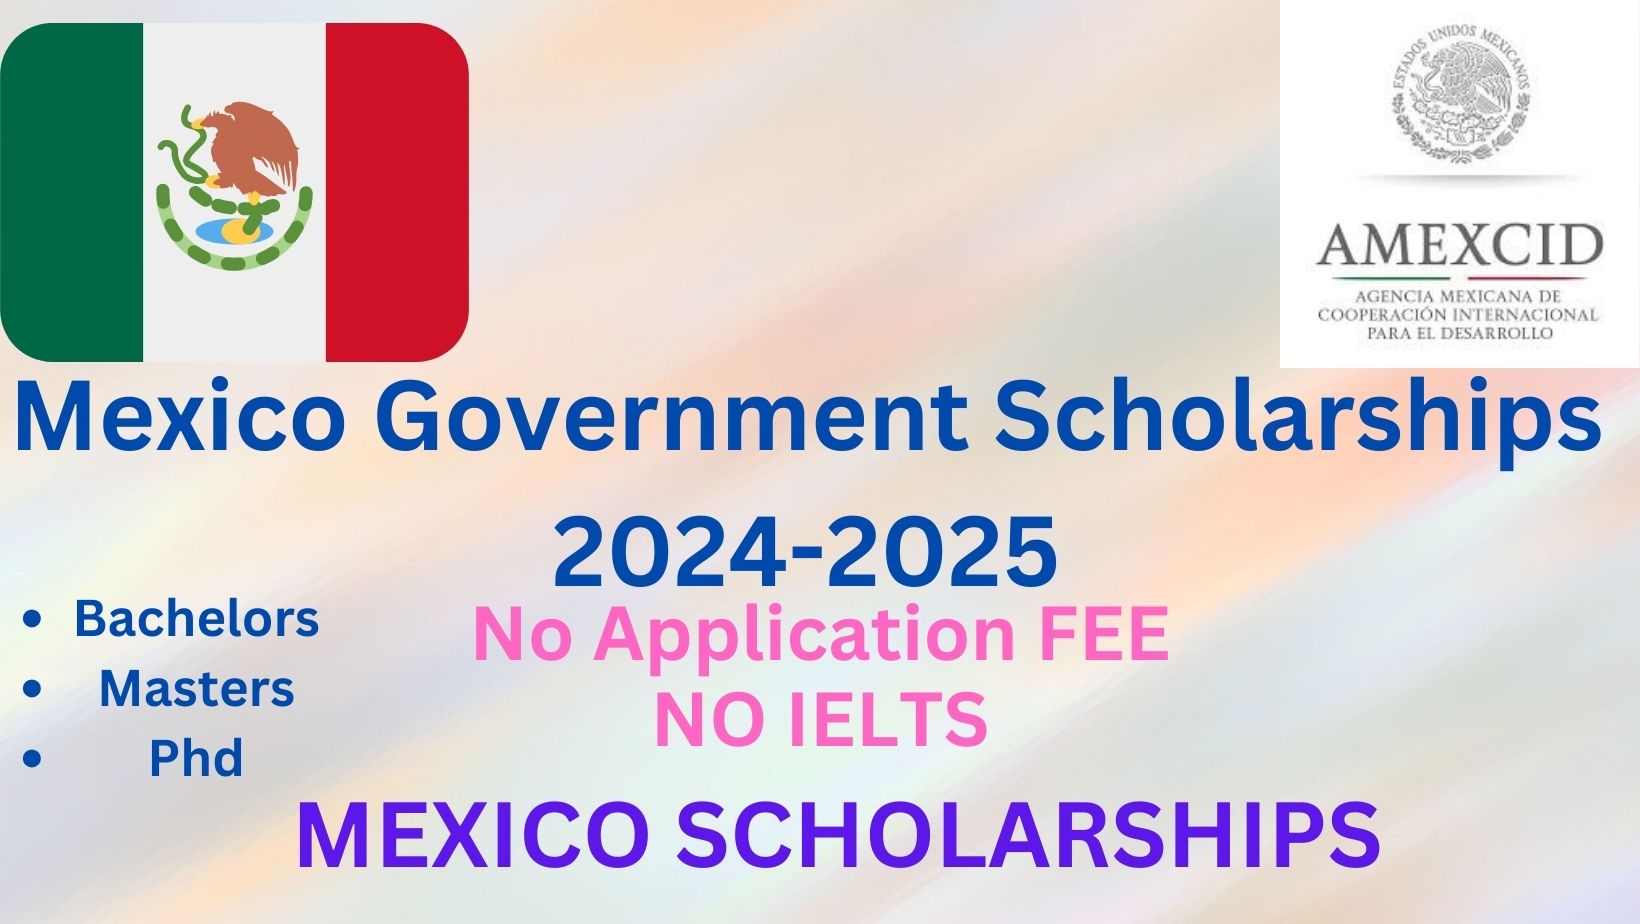 Mexico Government Scholarships 2024-2025